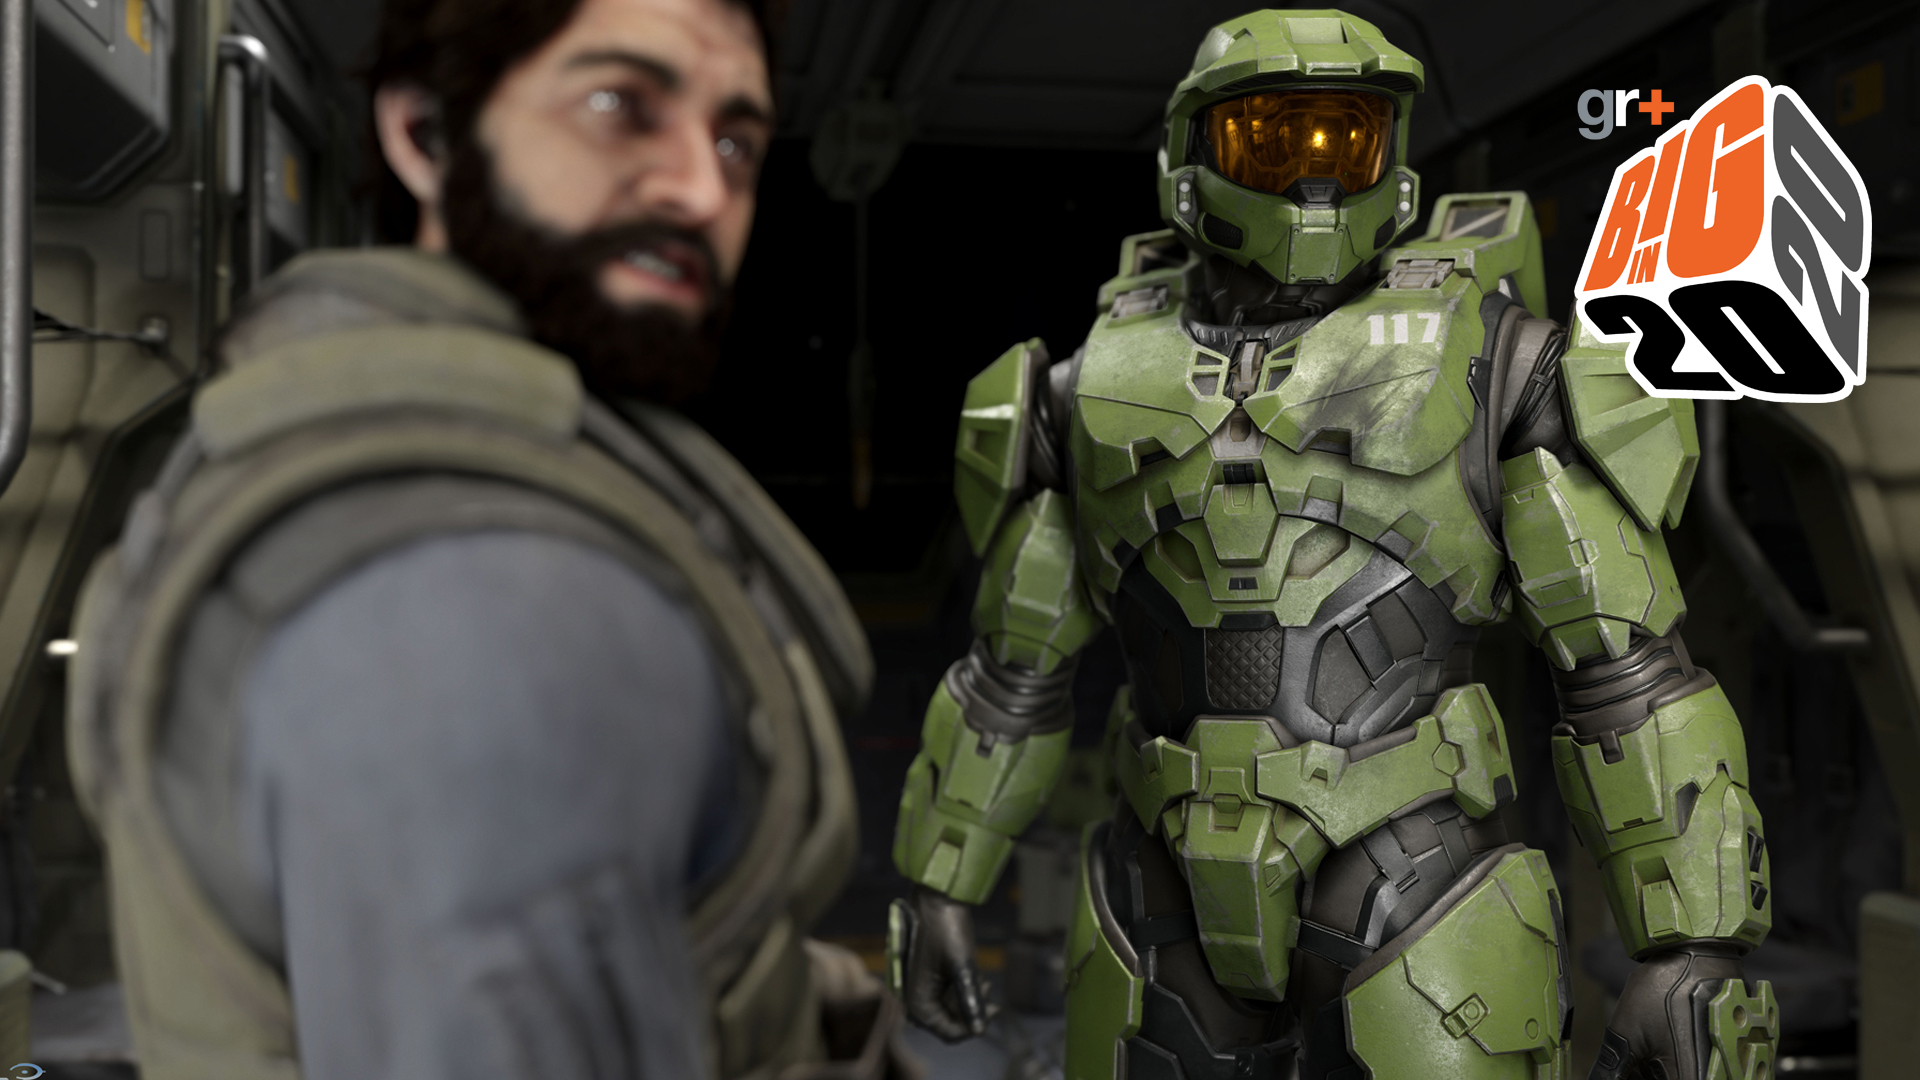 Big In 2020 Halo Infinite Will See Master Chief Attempt To